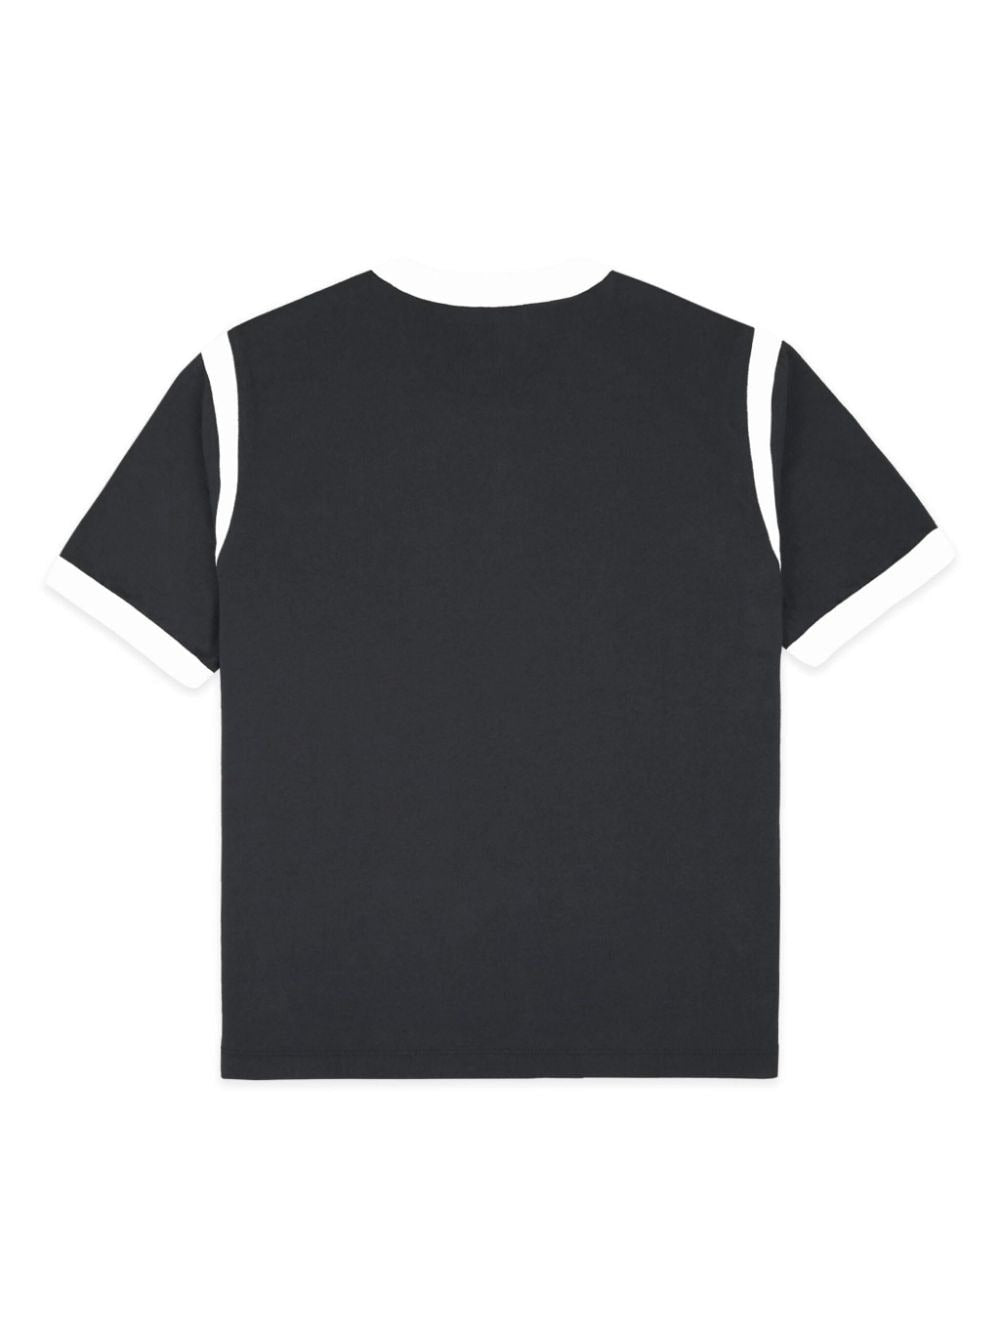 Sporty & Rich California Sports Tee in Faded Black